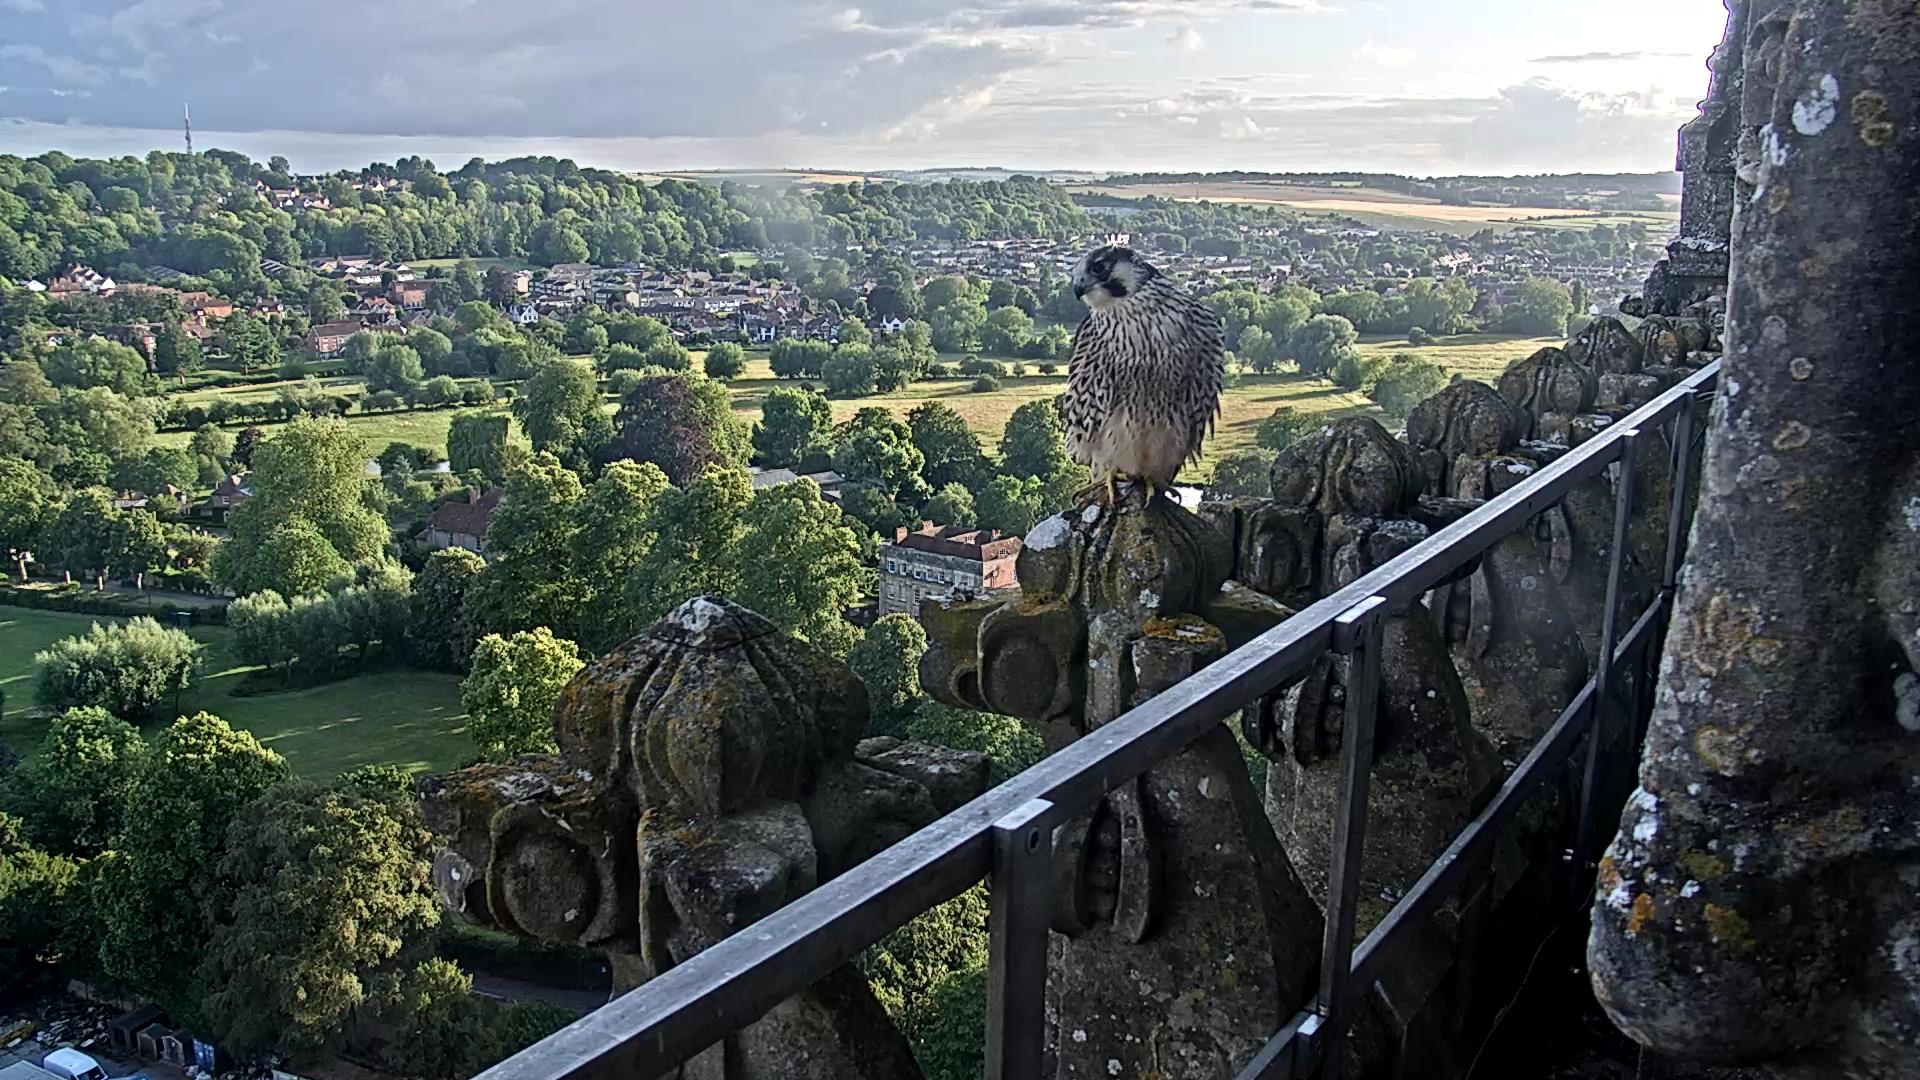 A last glimpse of Rex as the peregrine season draws to a close…